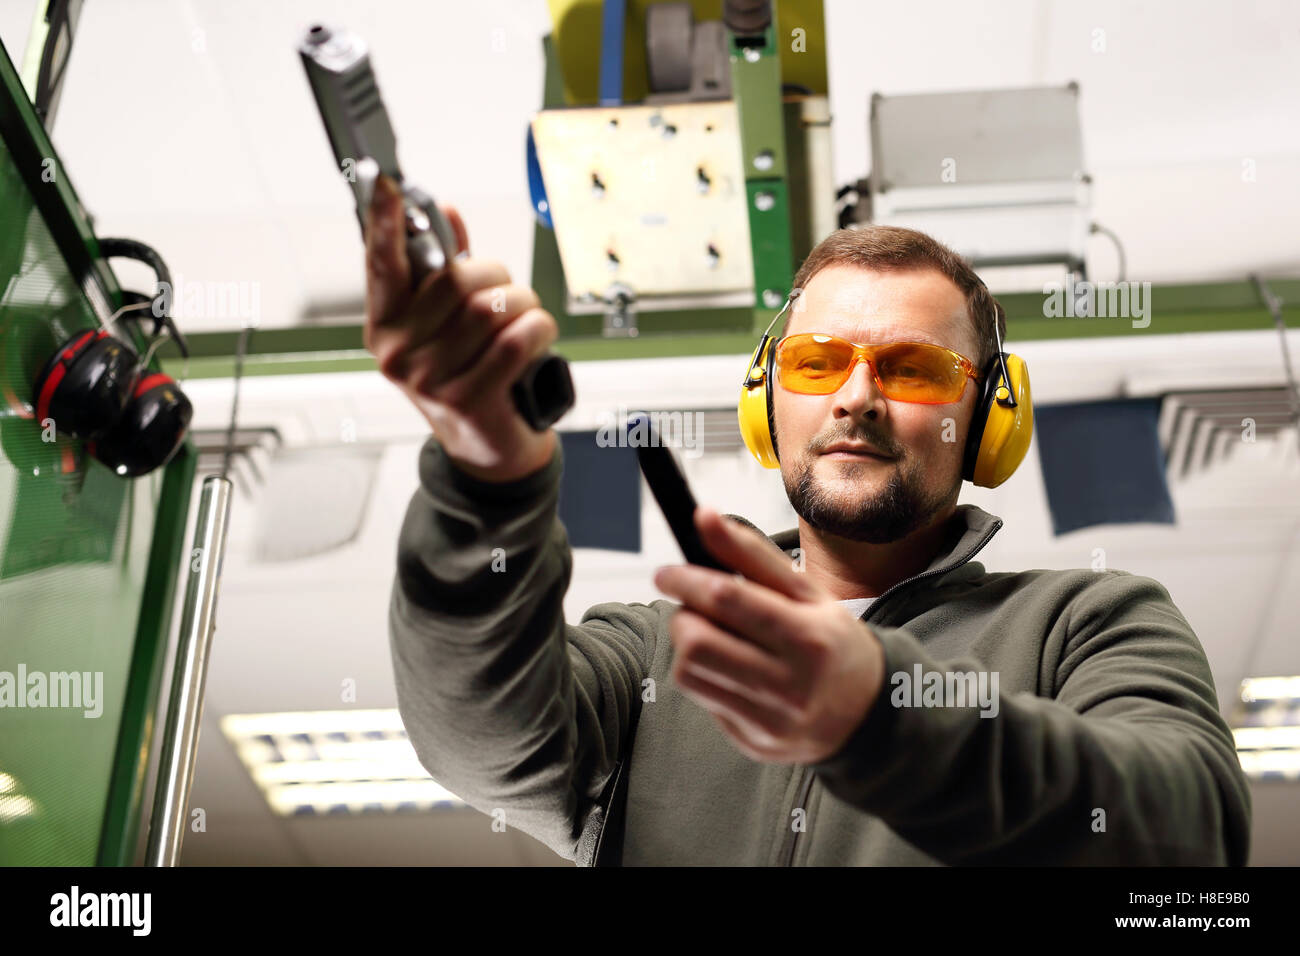 The man at the shooting reloads pistol Stock Photo